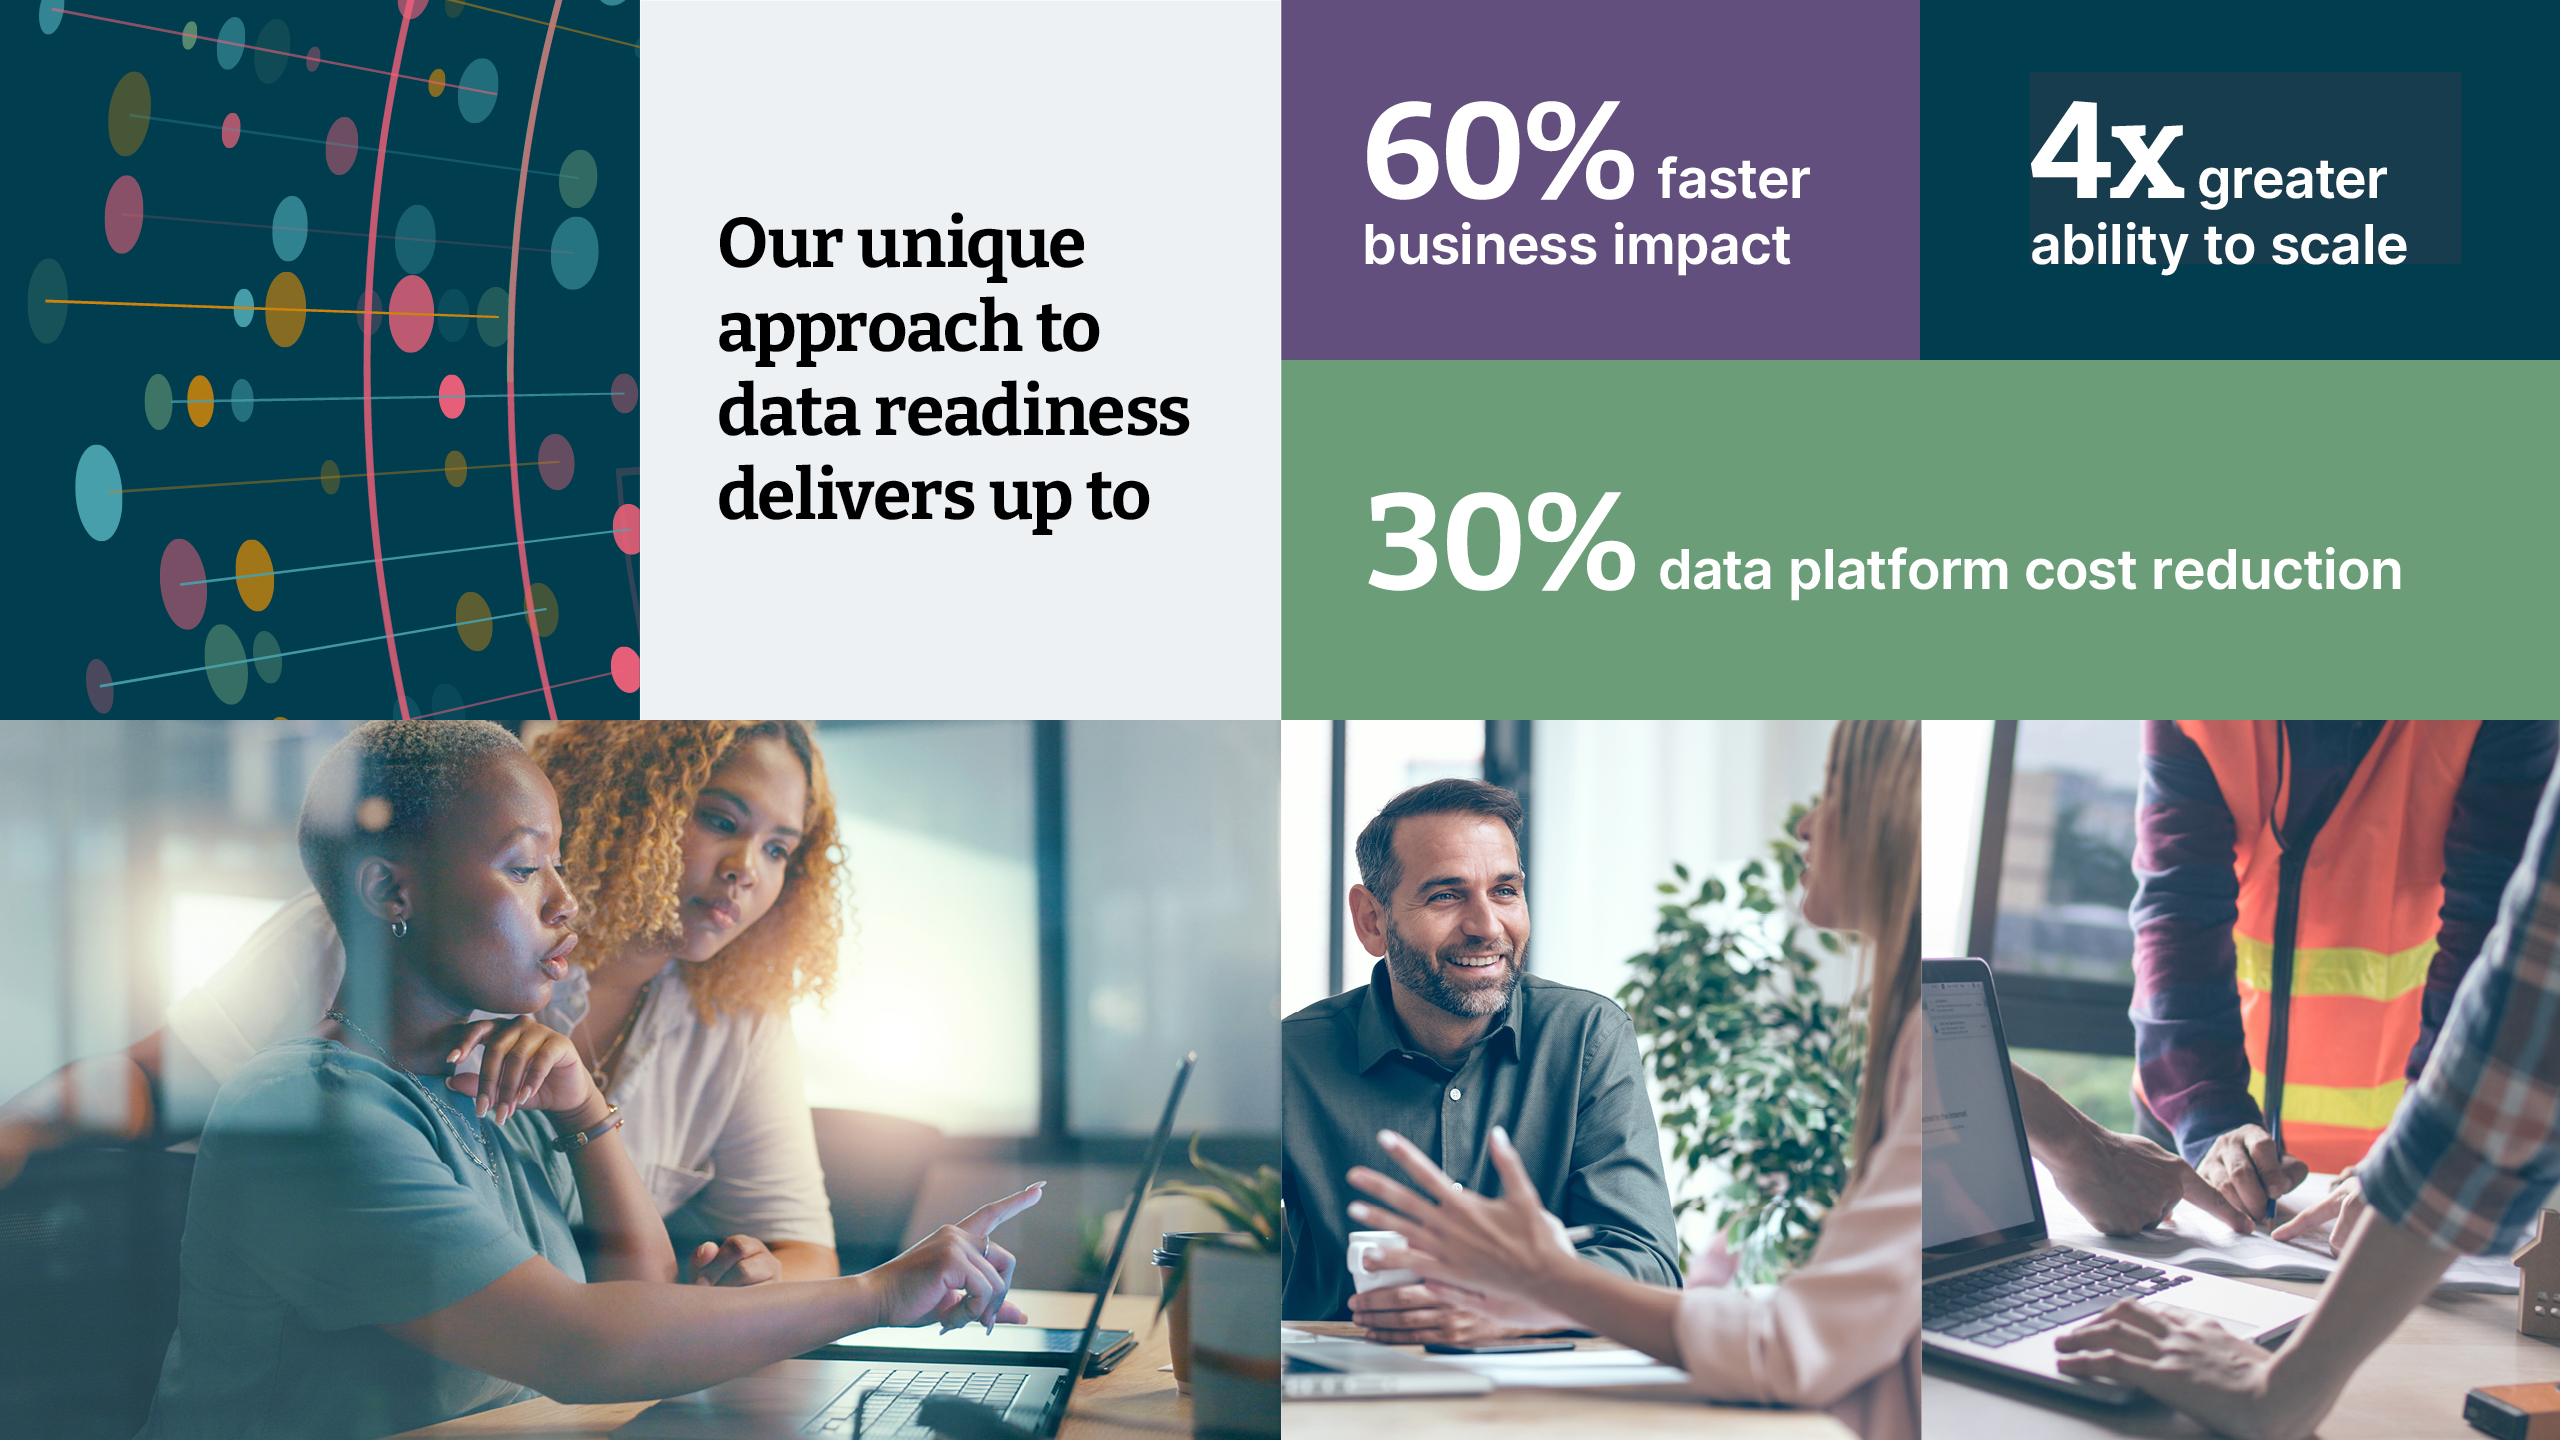   Our unique approach to data readiness delivers up to:  1) 60% faster business impact 2) 4x greater ability to scale 3) 30% data platform cost reduction. 